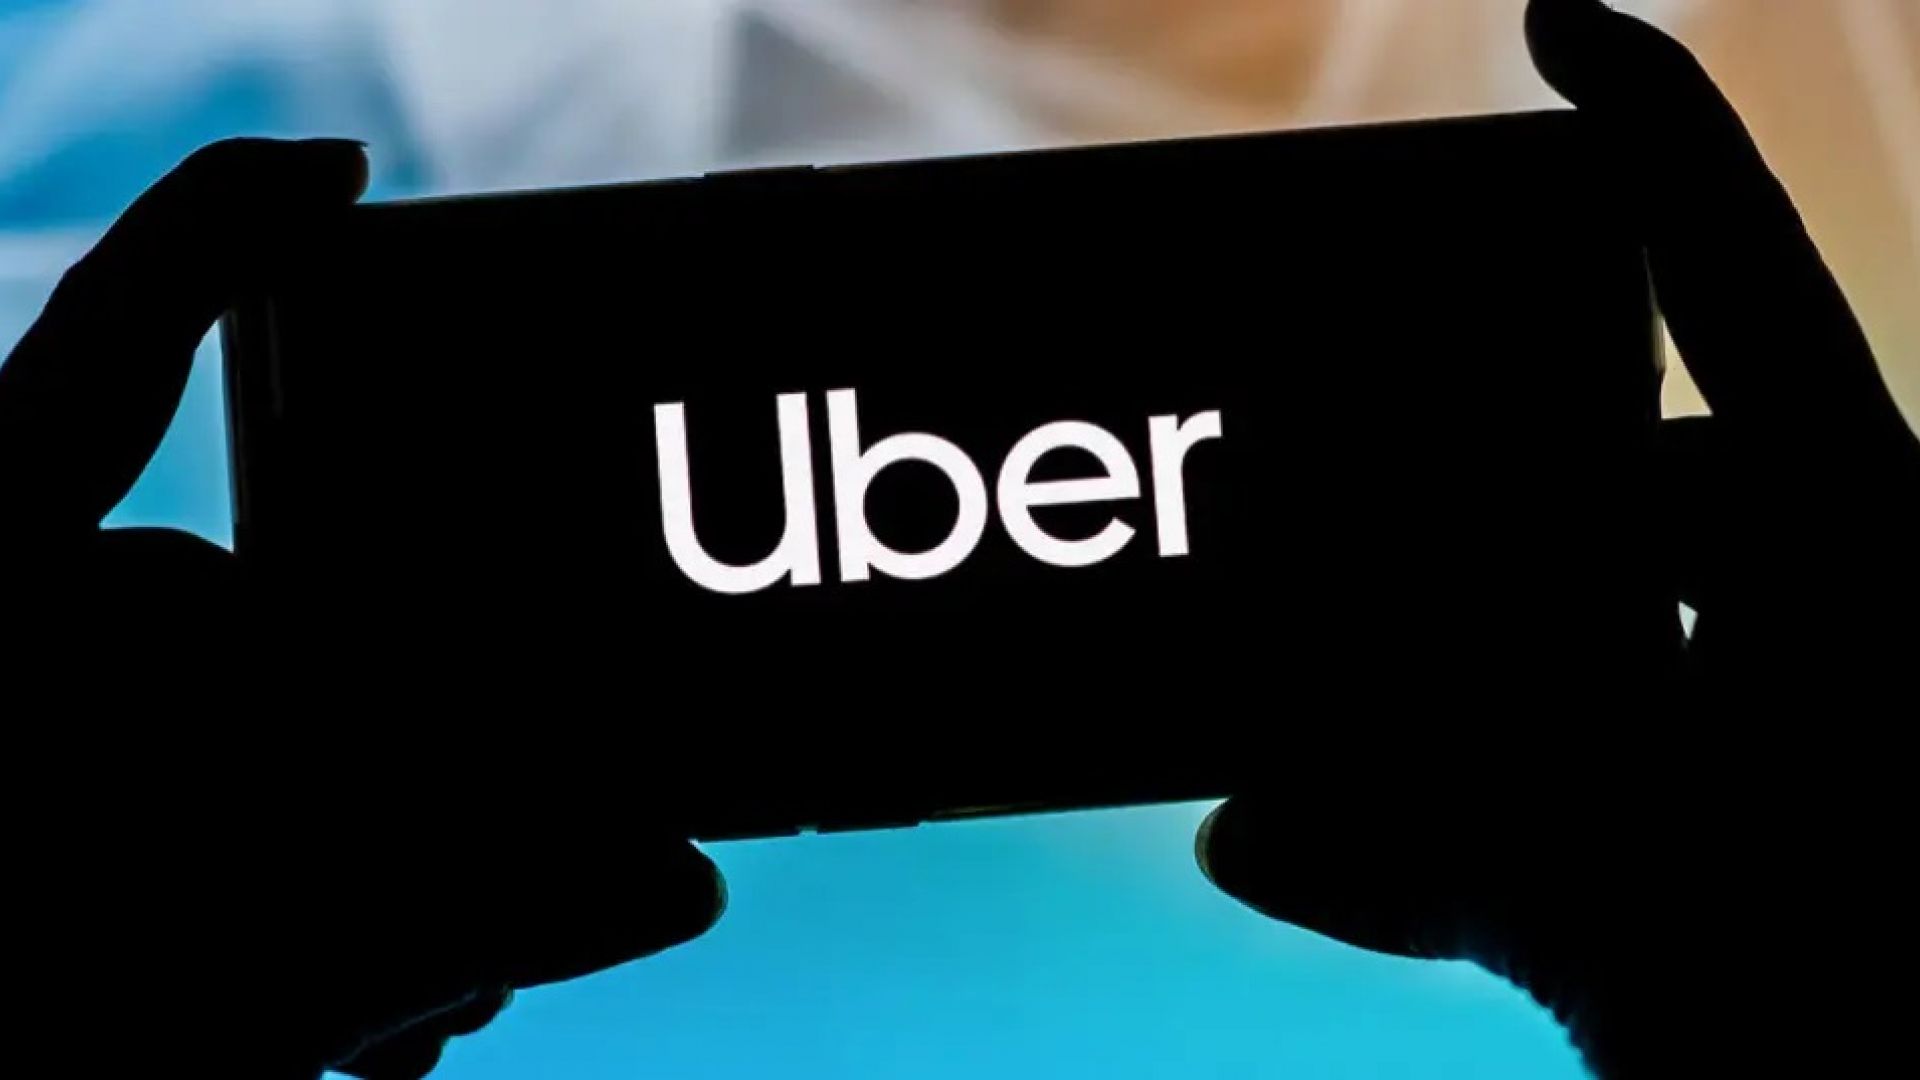 uber-phone files scandal workers rights